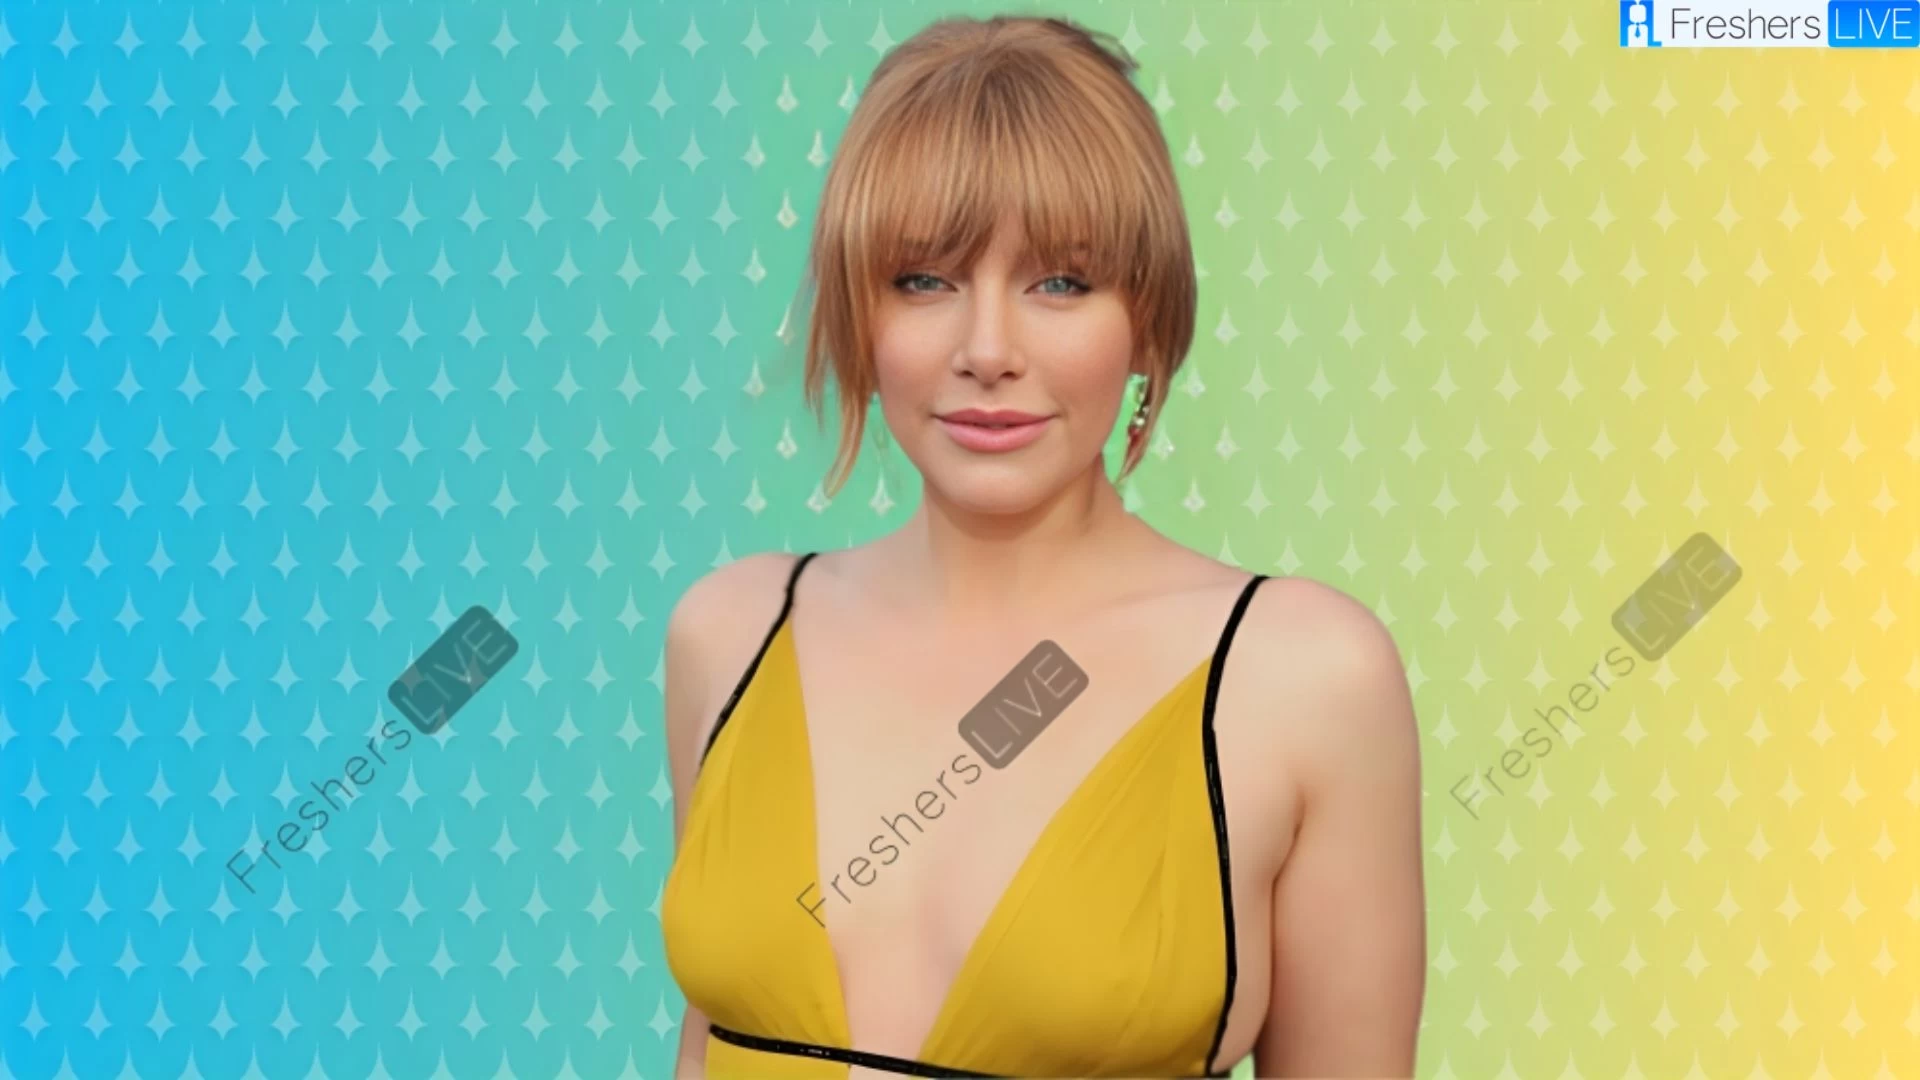 Bryce Dallas Howard Ethnicity, What is Bryce Dallas Howard's Ethnicity?